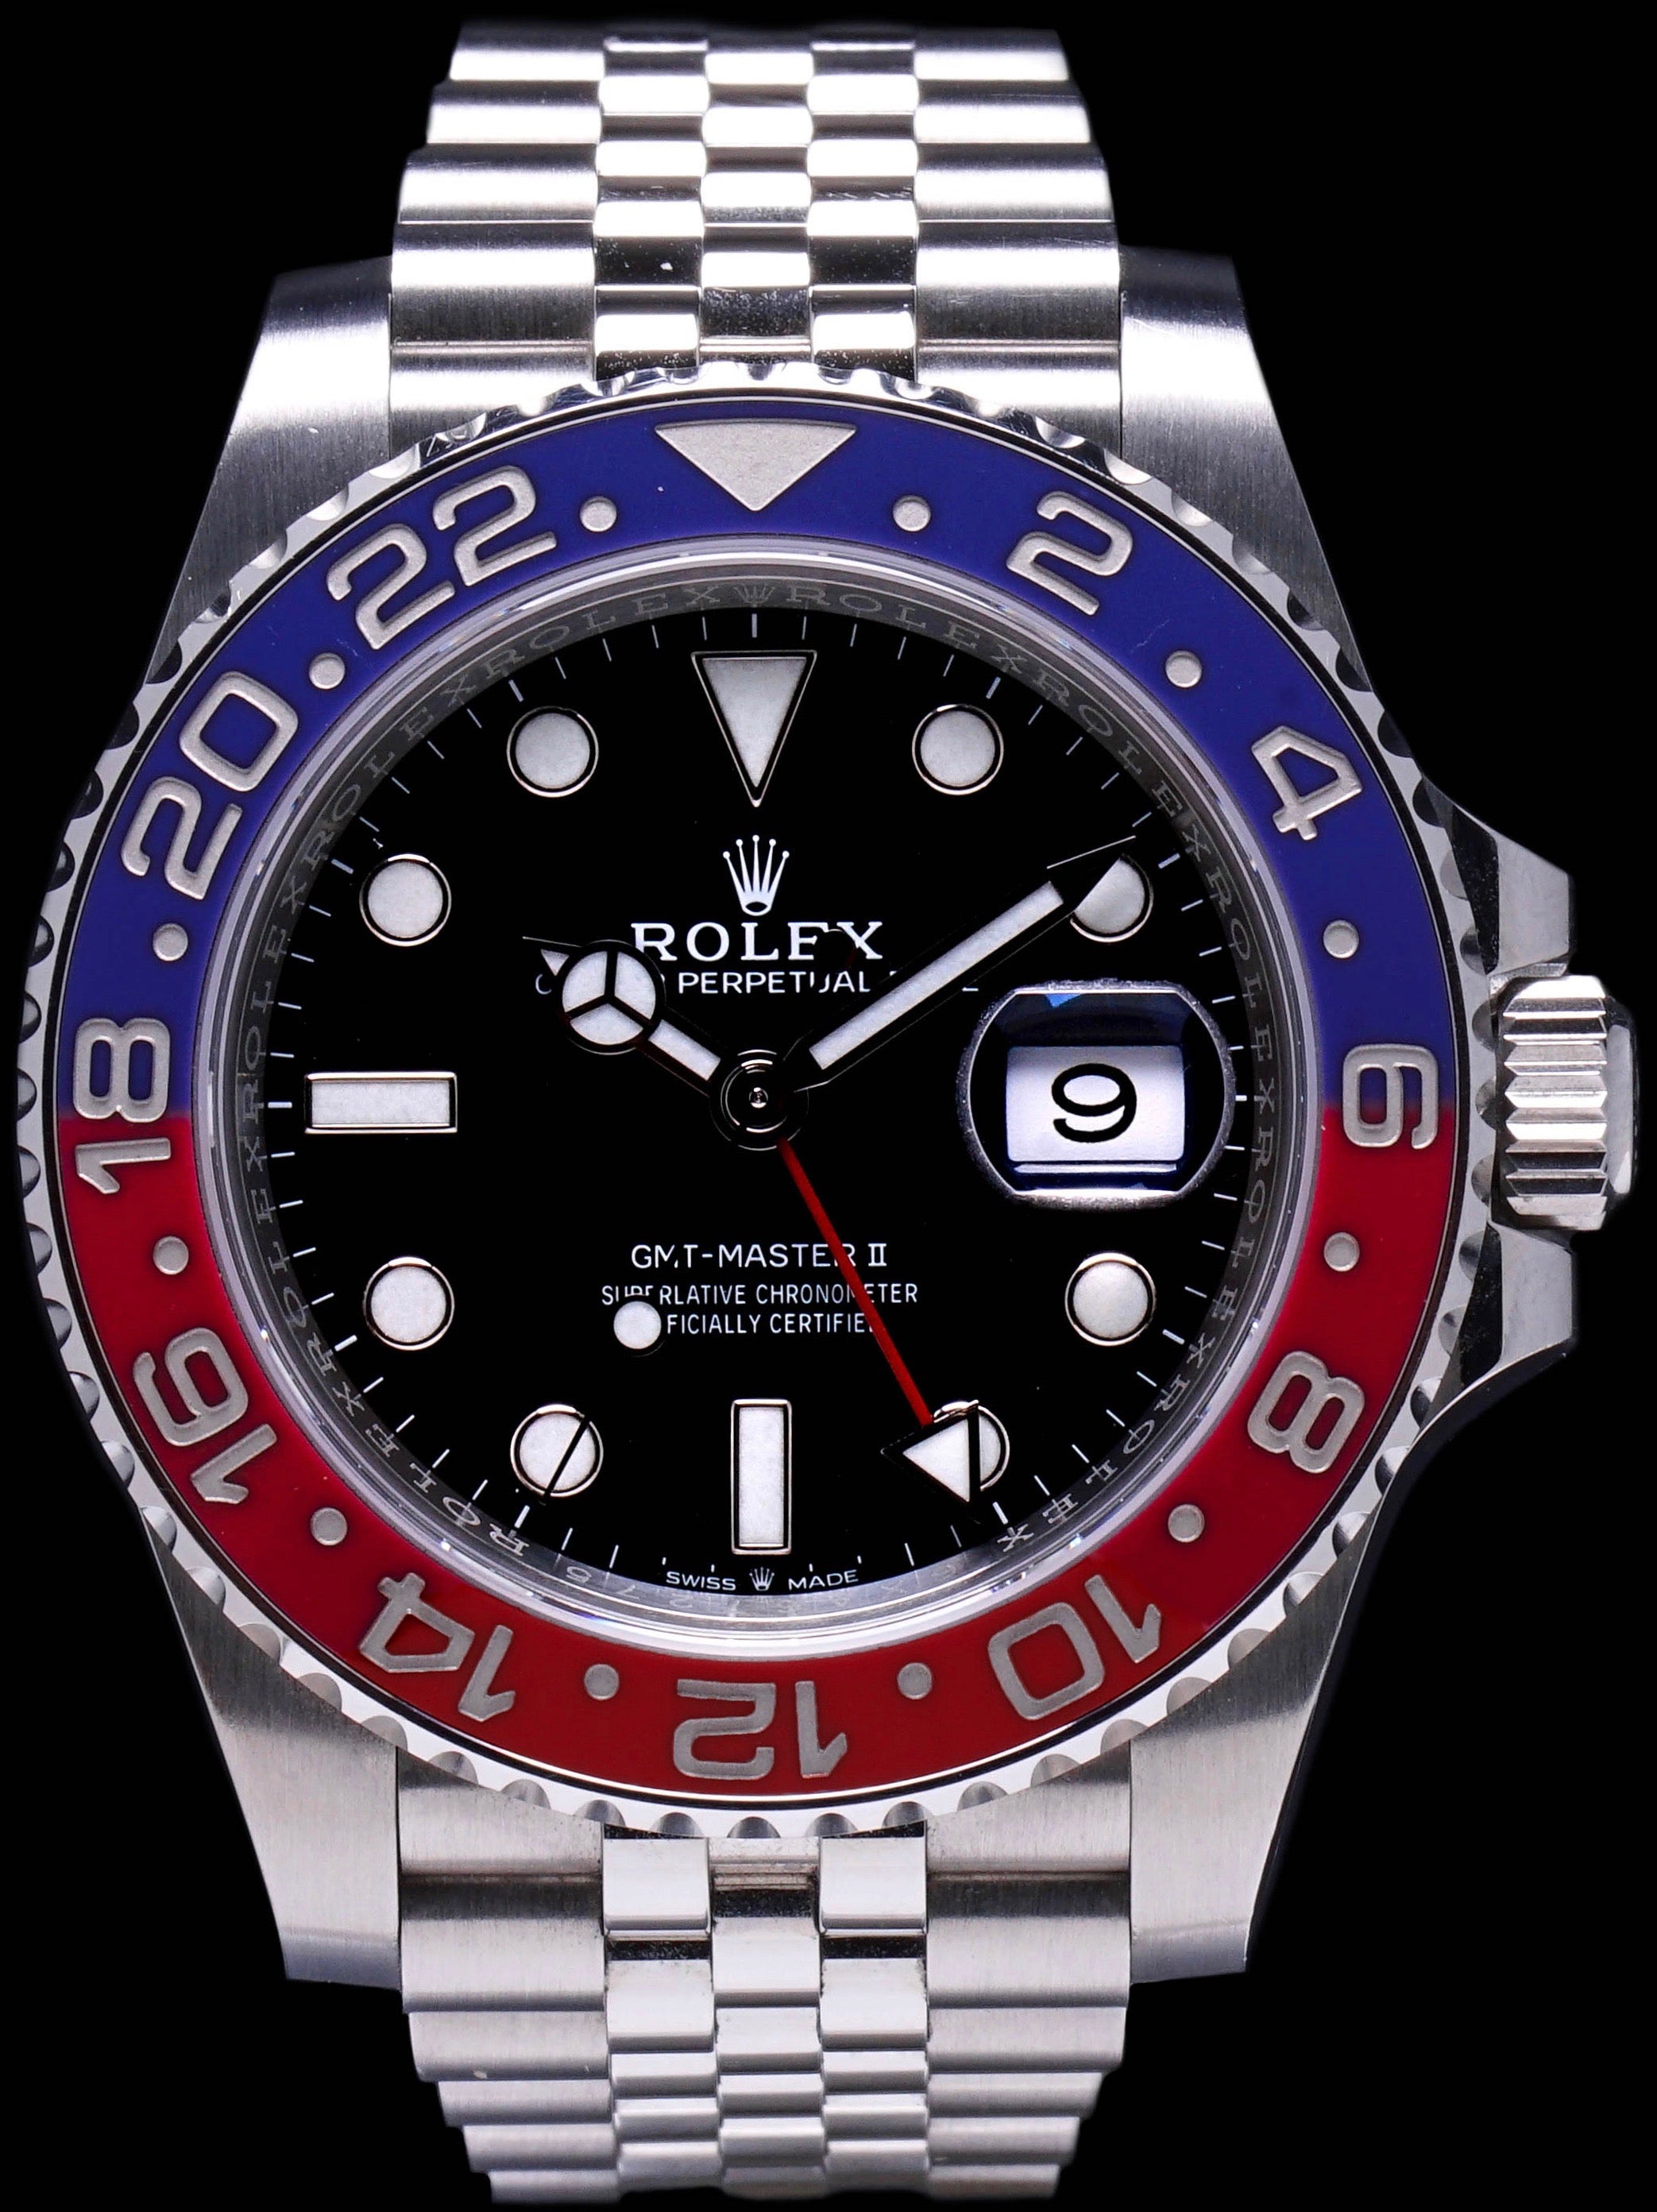 2018 Rolex GMT-Master II (Ref. 126710 BLRO) "Pepsi" with Box and Card